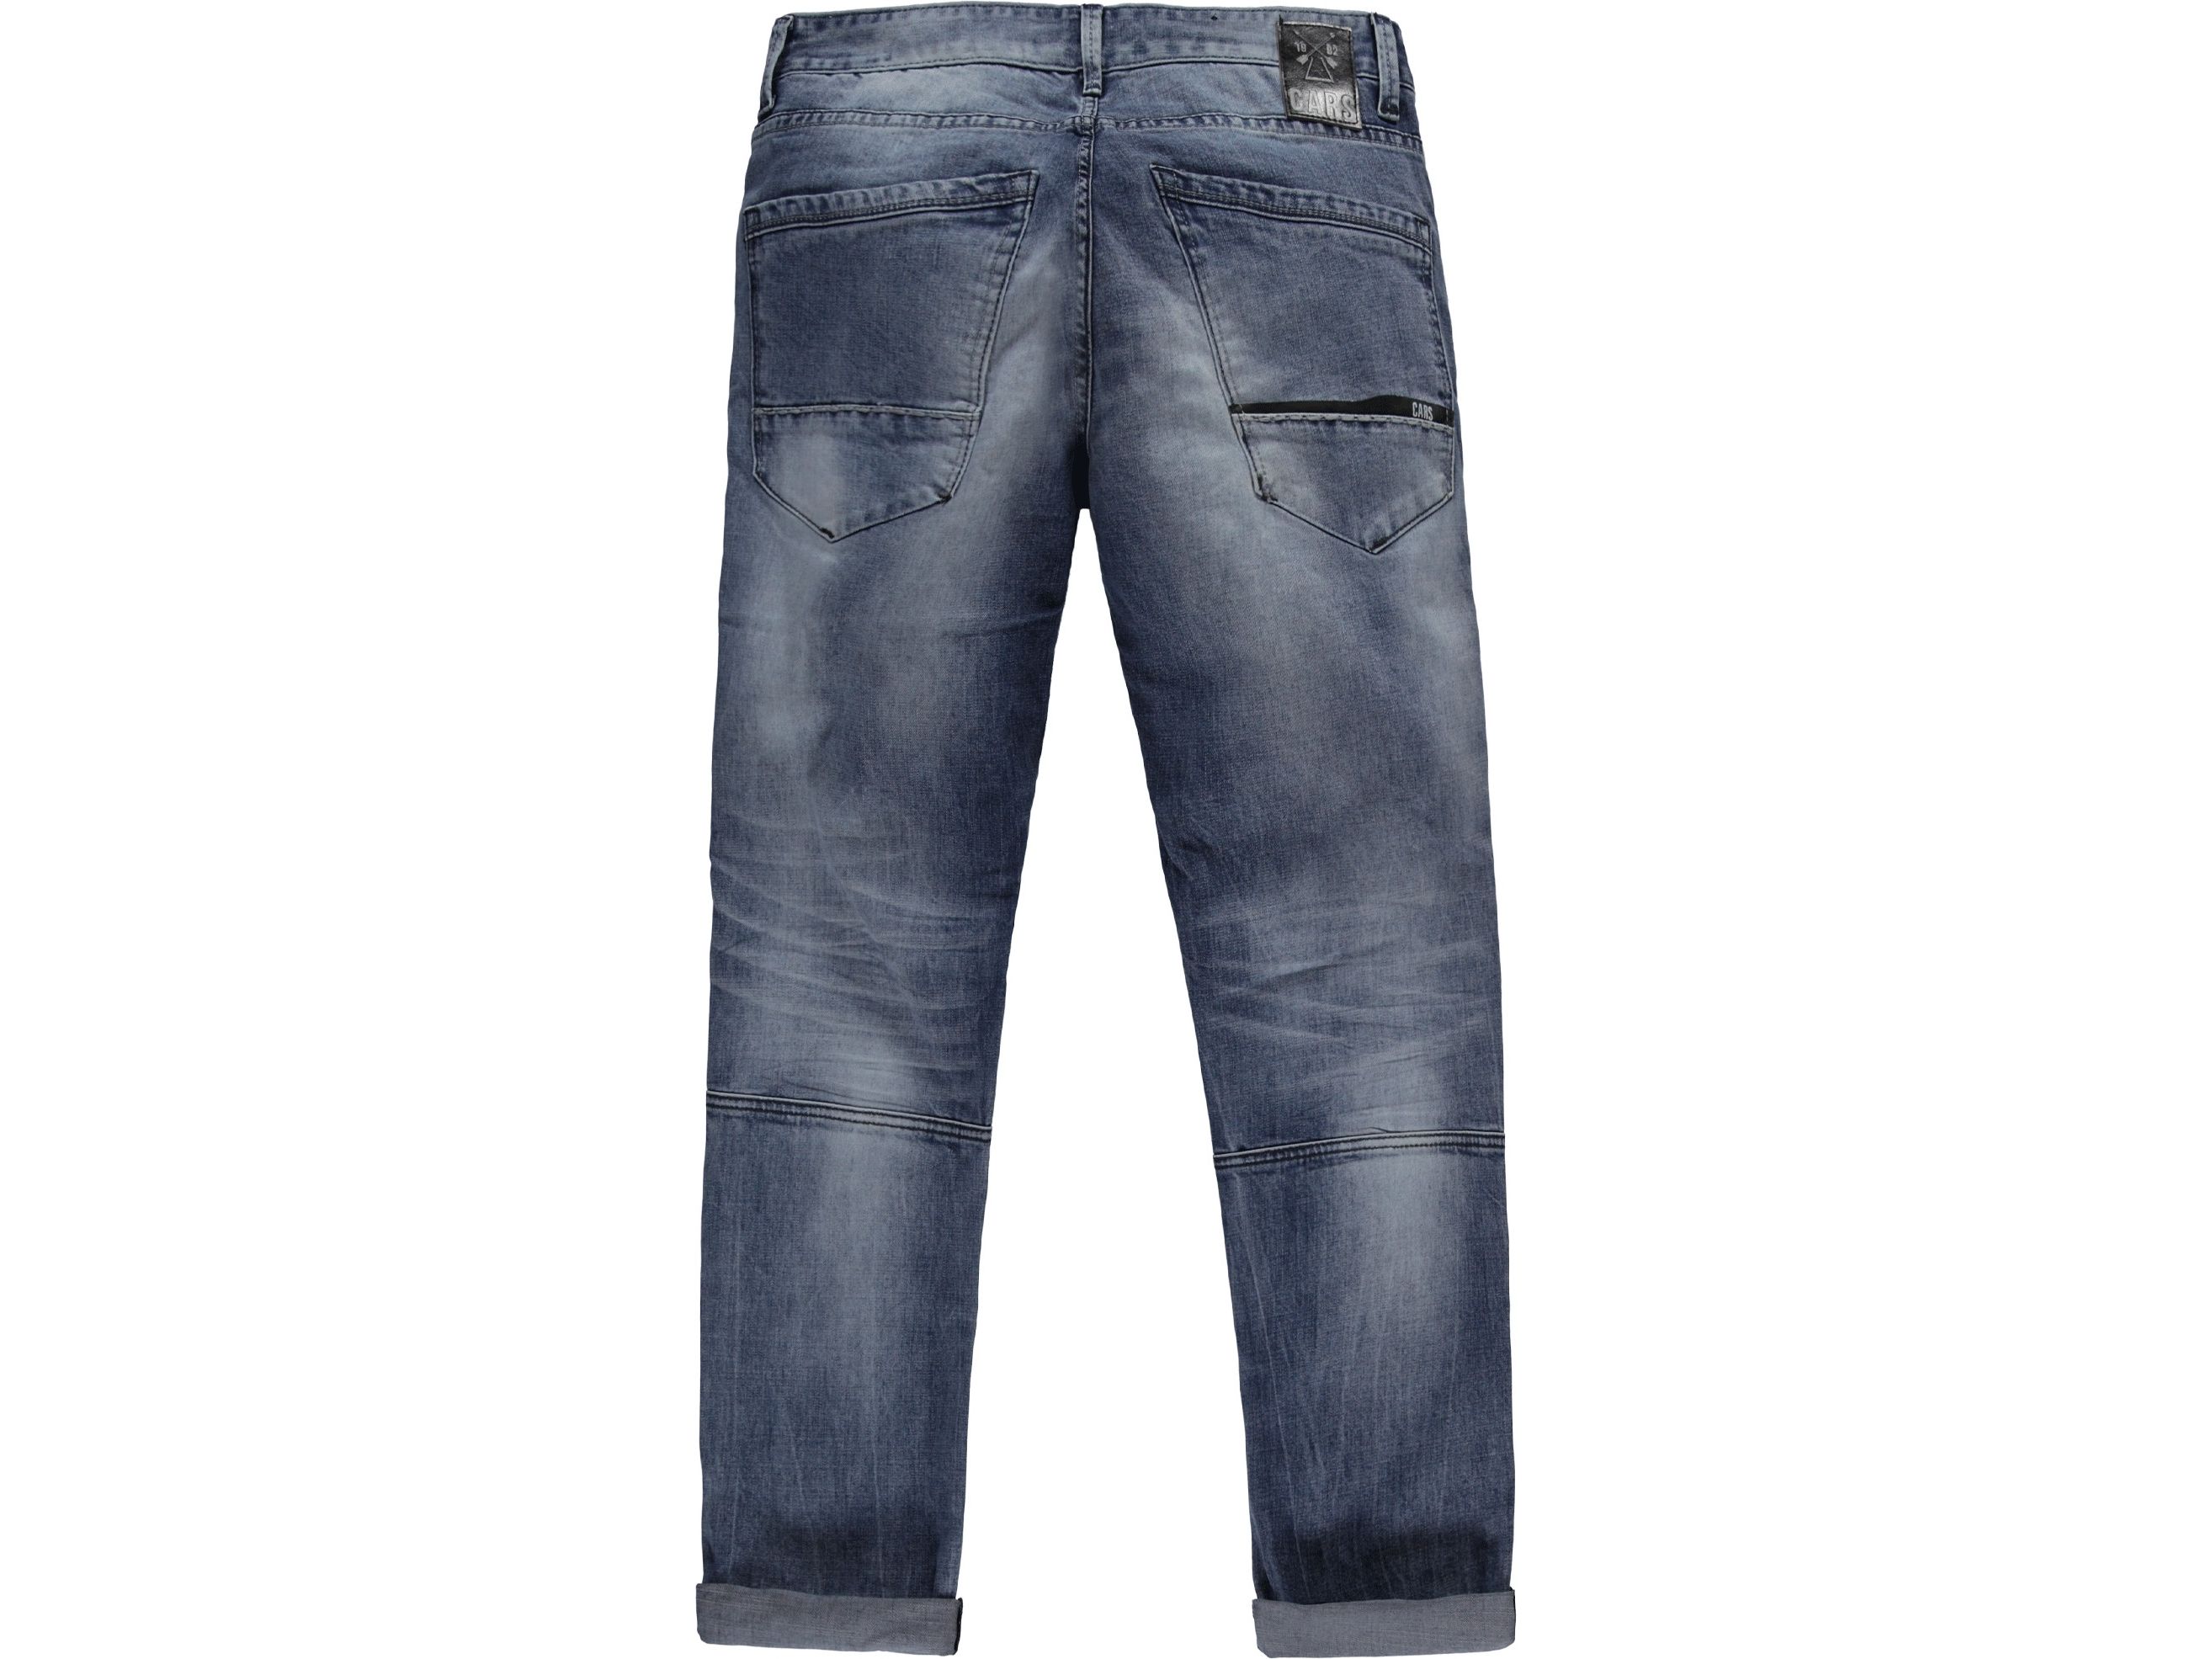 cars-jeans-chapman-of-chester